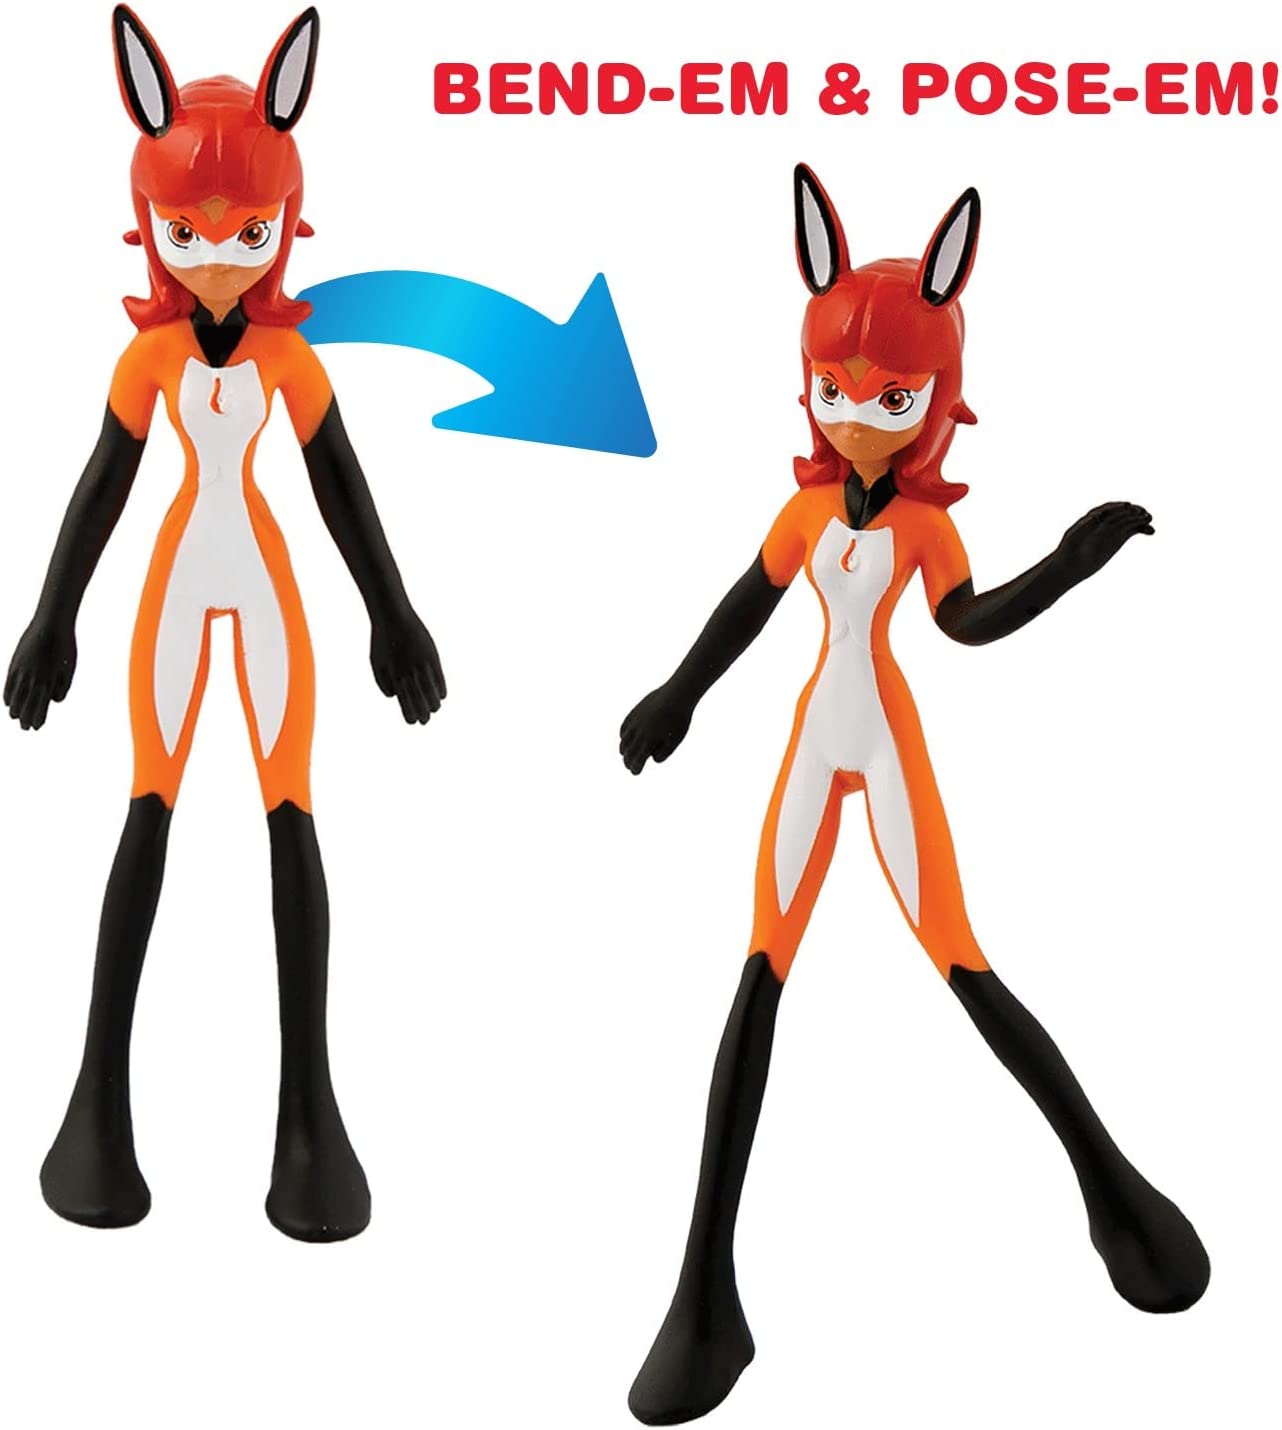 Rena Rouge from Miraculous bendable figure